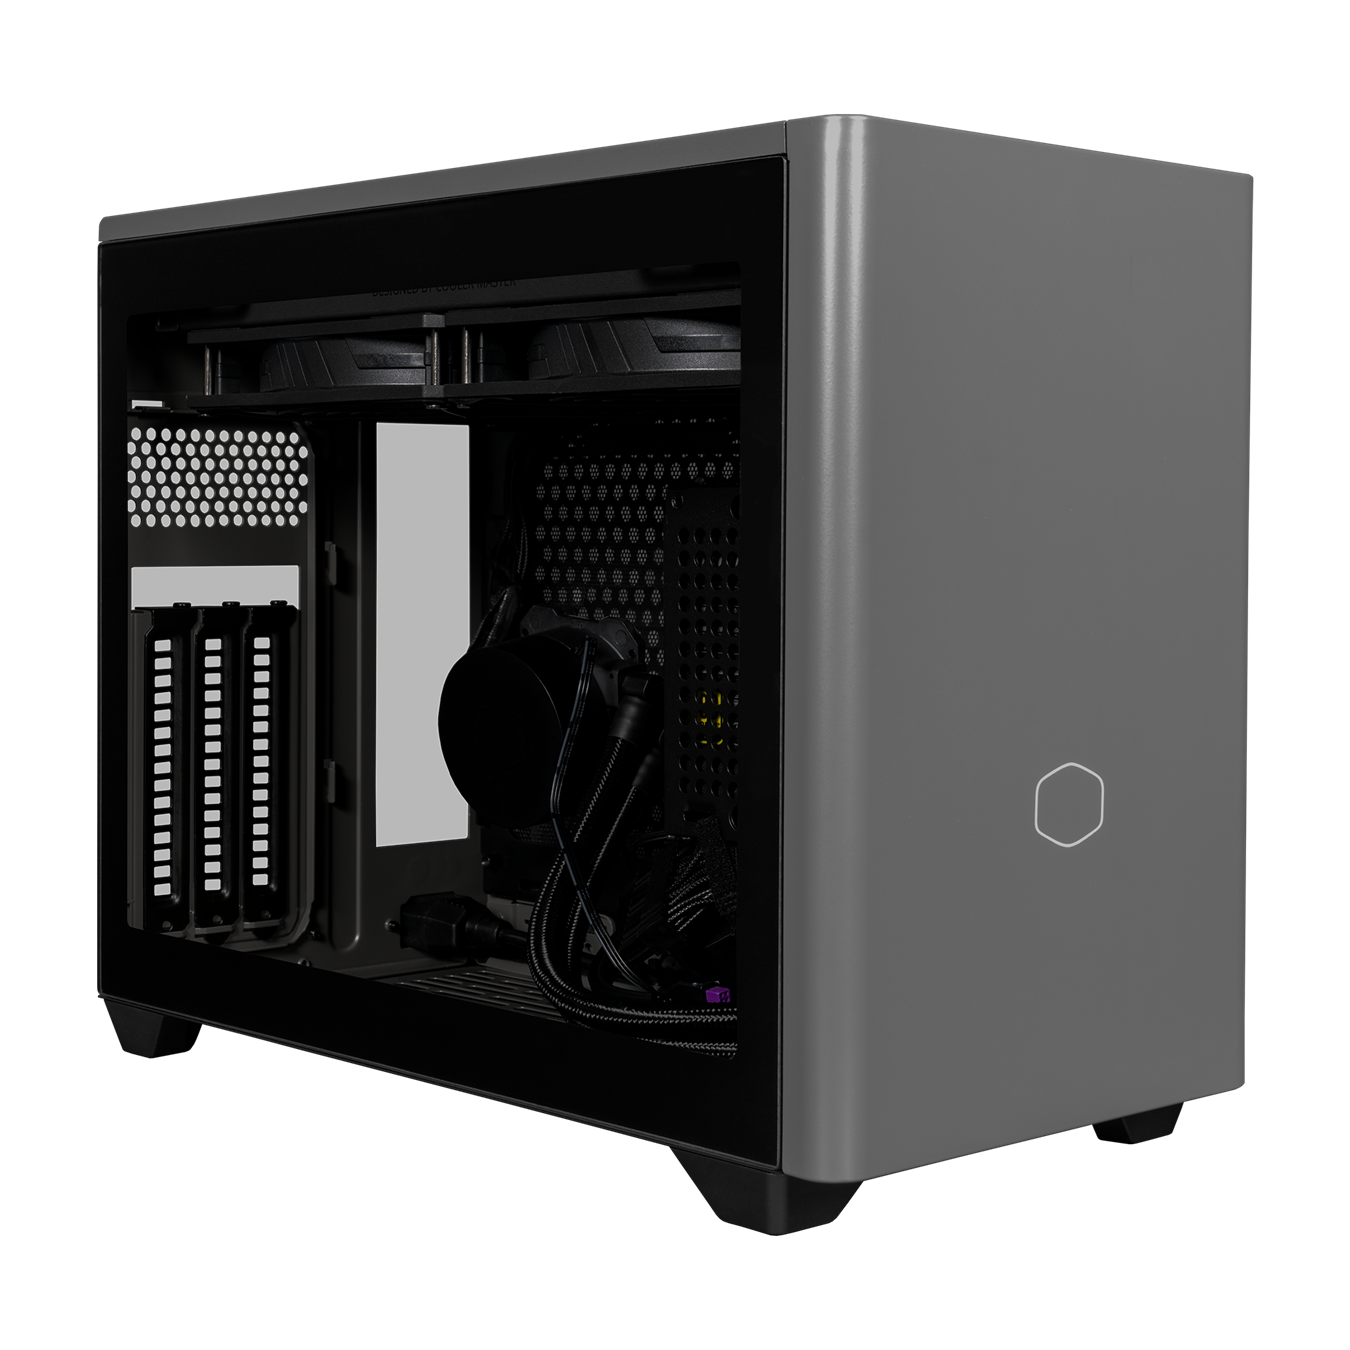 Angled side veiw of NR200P MAX with tempered glass side panel and satin grey front panel. Included components such as the AIO and PSU as displayed behind the tempered glass. 